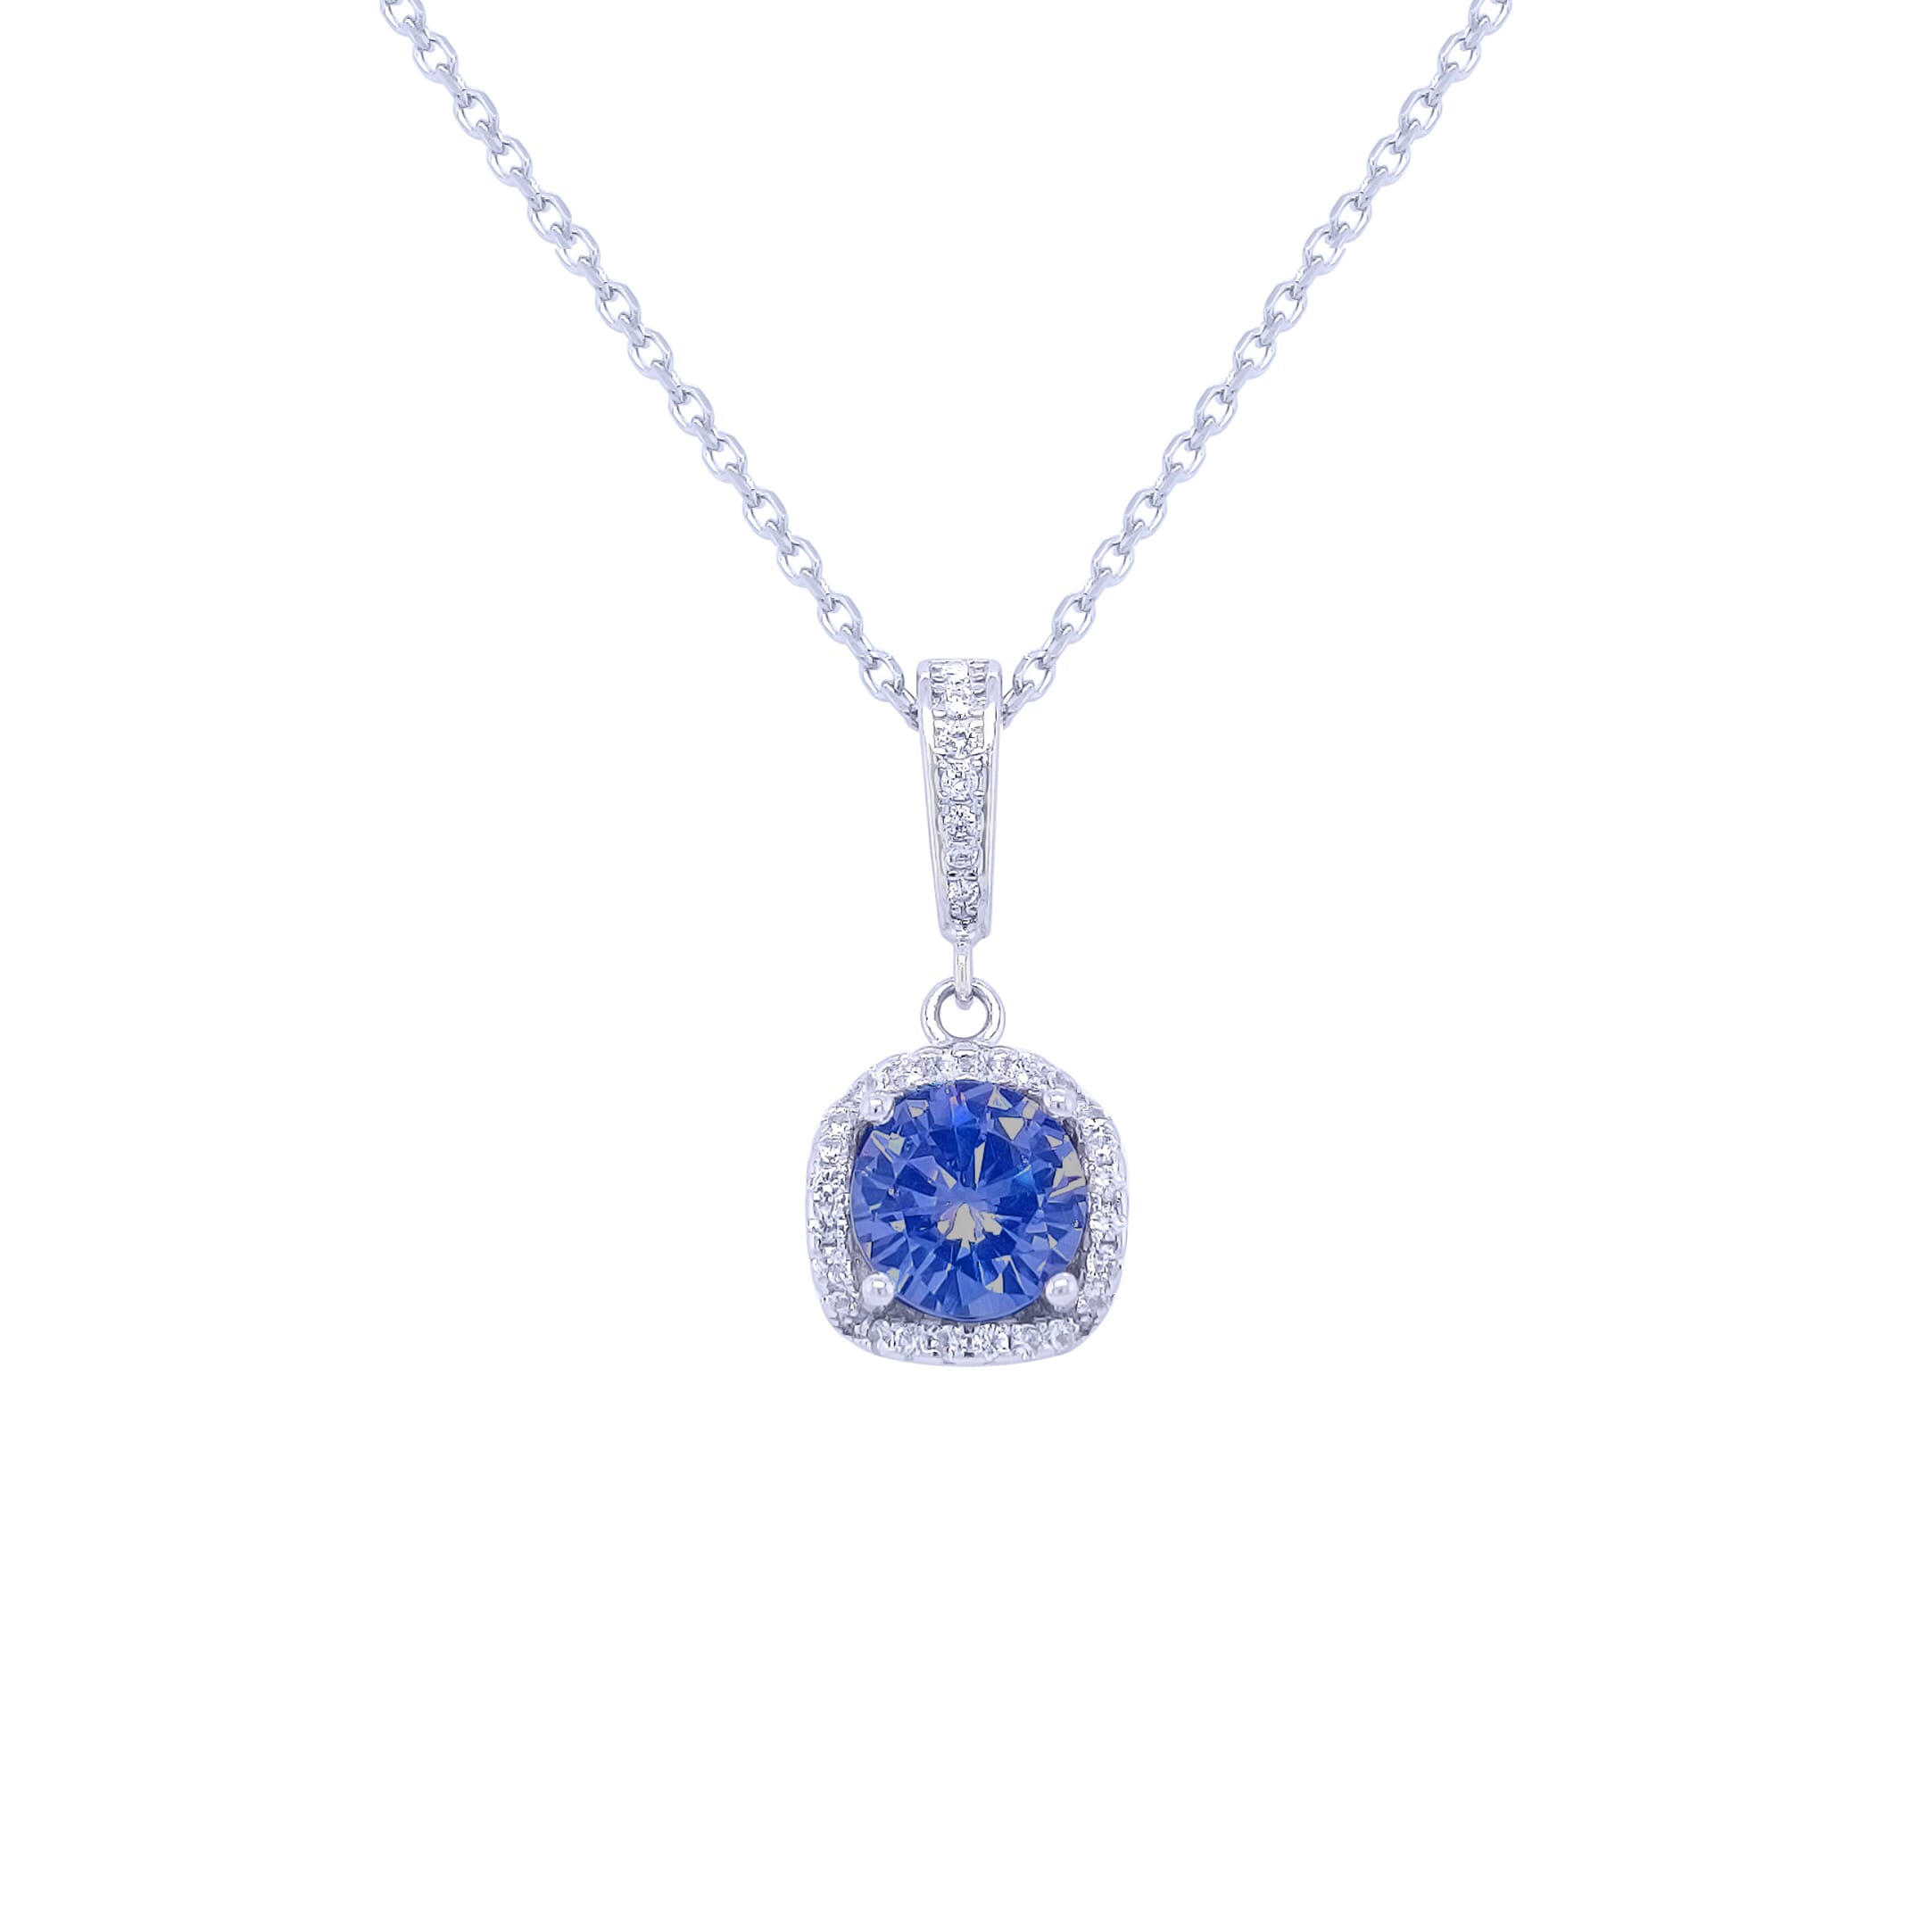 Asfour 925 Sterling Silver Necklace With Blue Square Pendant